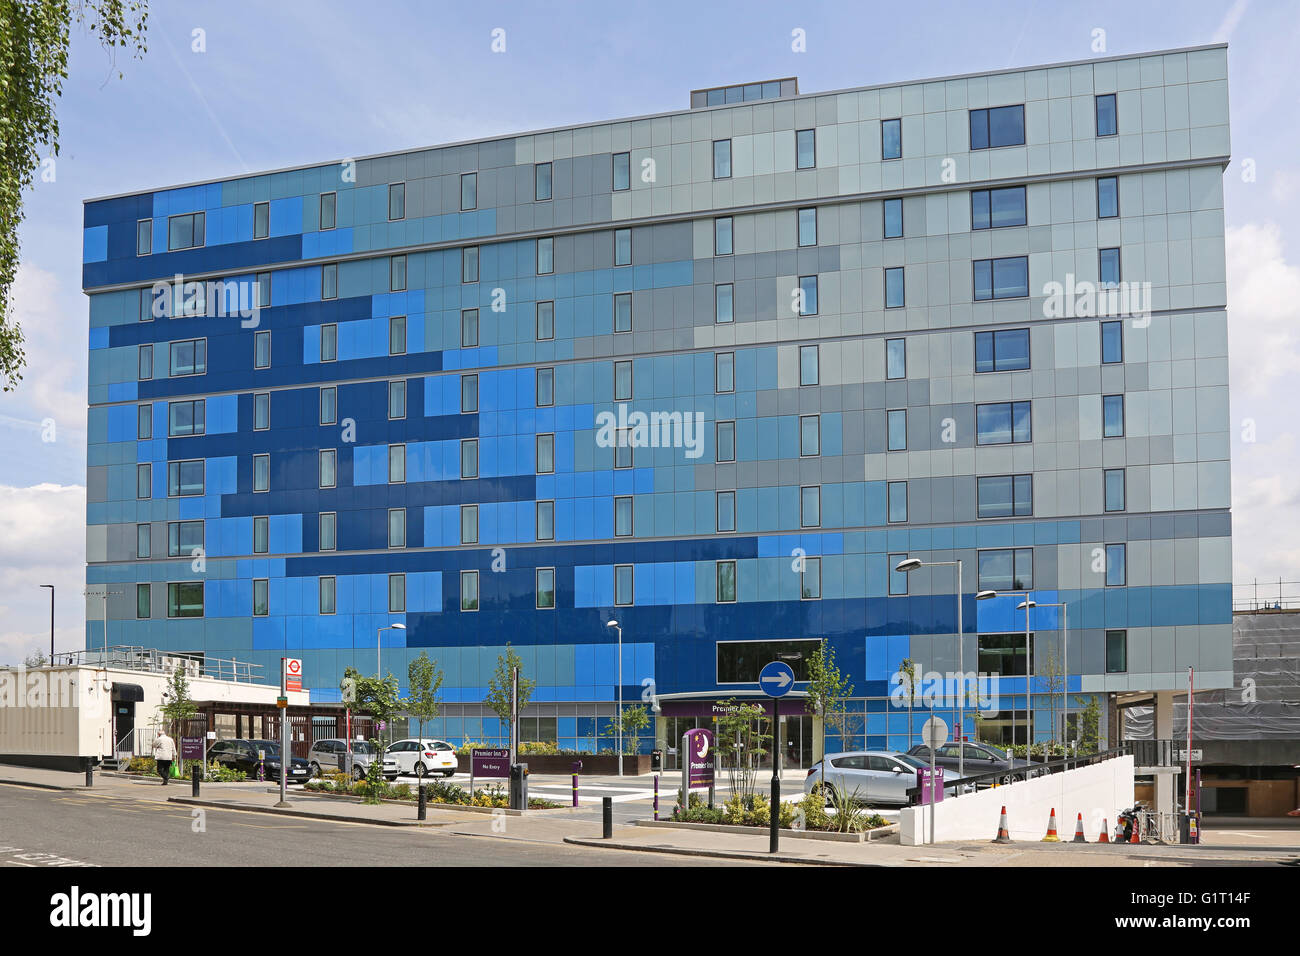 The Premier Inn Hotel, Archway, London. A converted office block refurbished and reclad in distinctive blue and grey panels Stock Photo